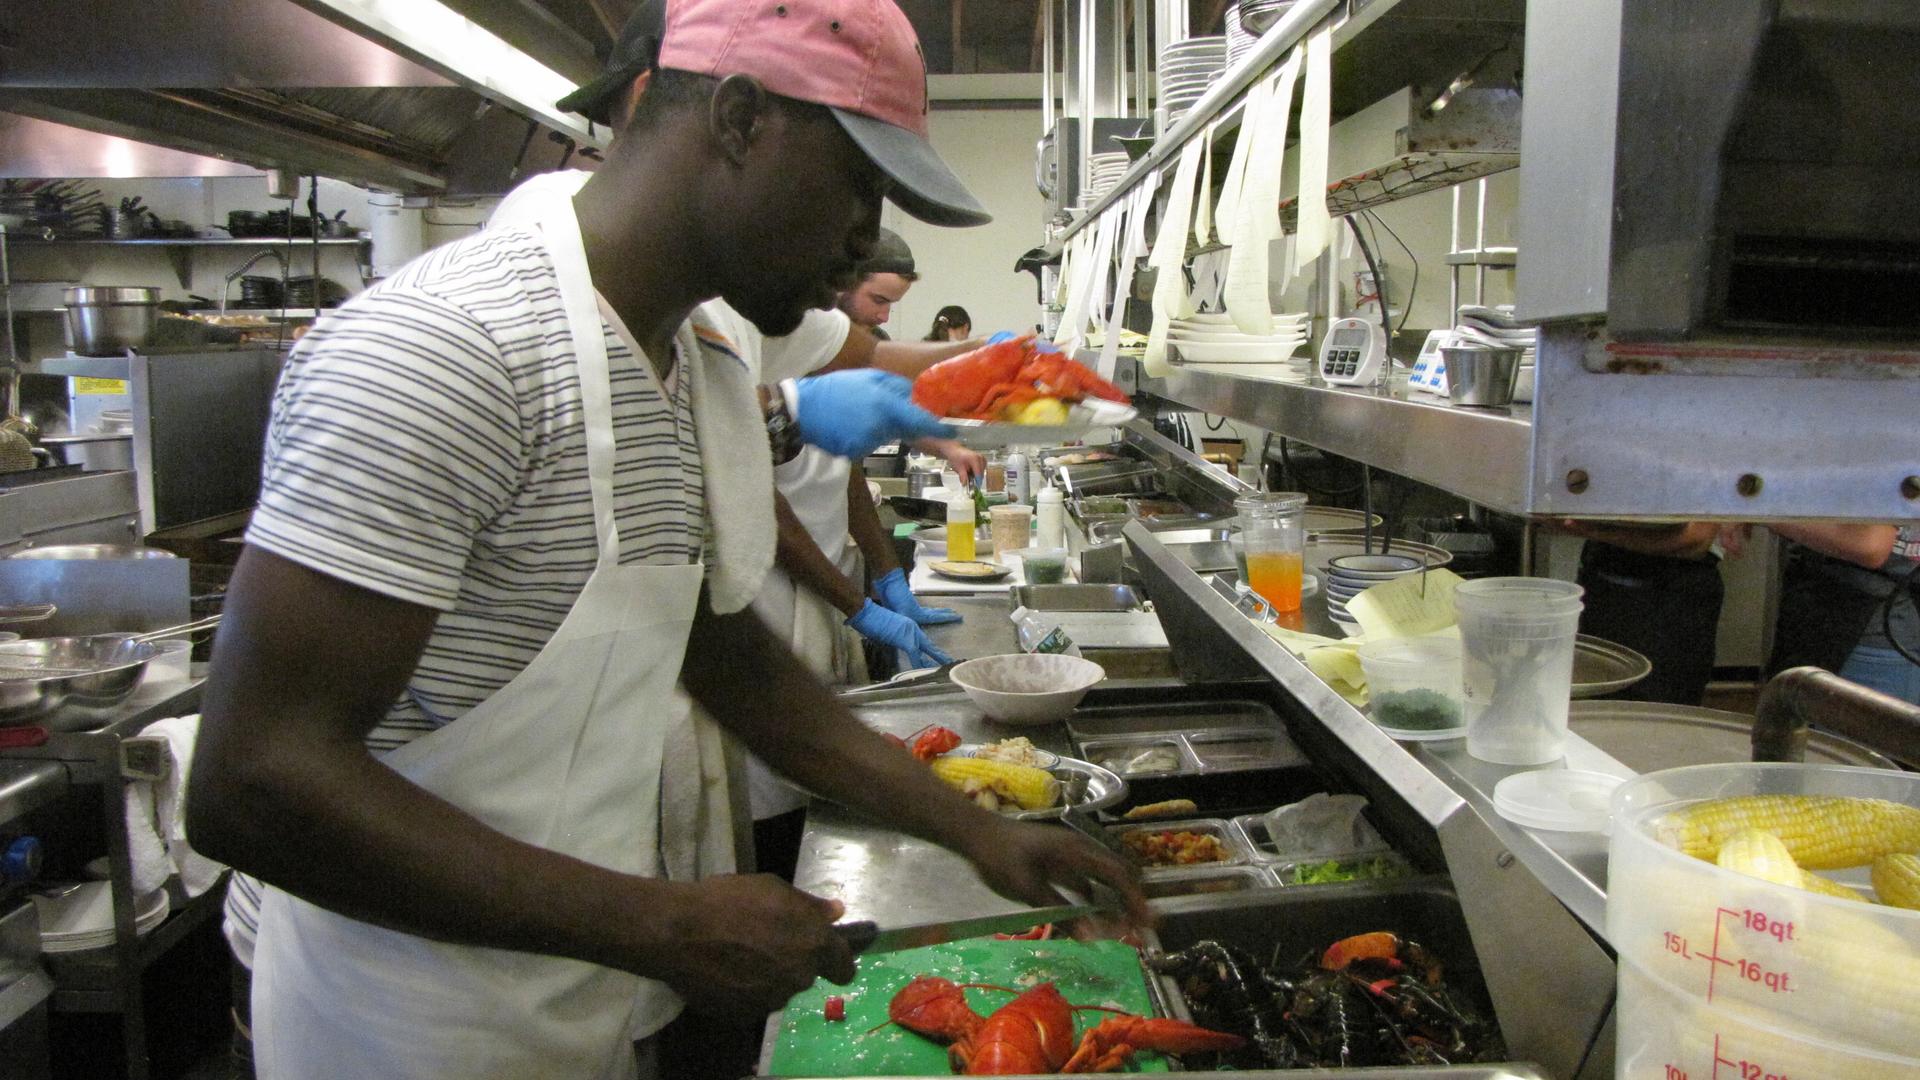 Many of the employees at the Home Port restaurant on Martha's Vineyard are from Jamaica. But this year, the owner couldn't get the visas she needed. So she's short on staff. "We're closing two days a week for dinner. I've never had to do that before."